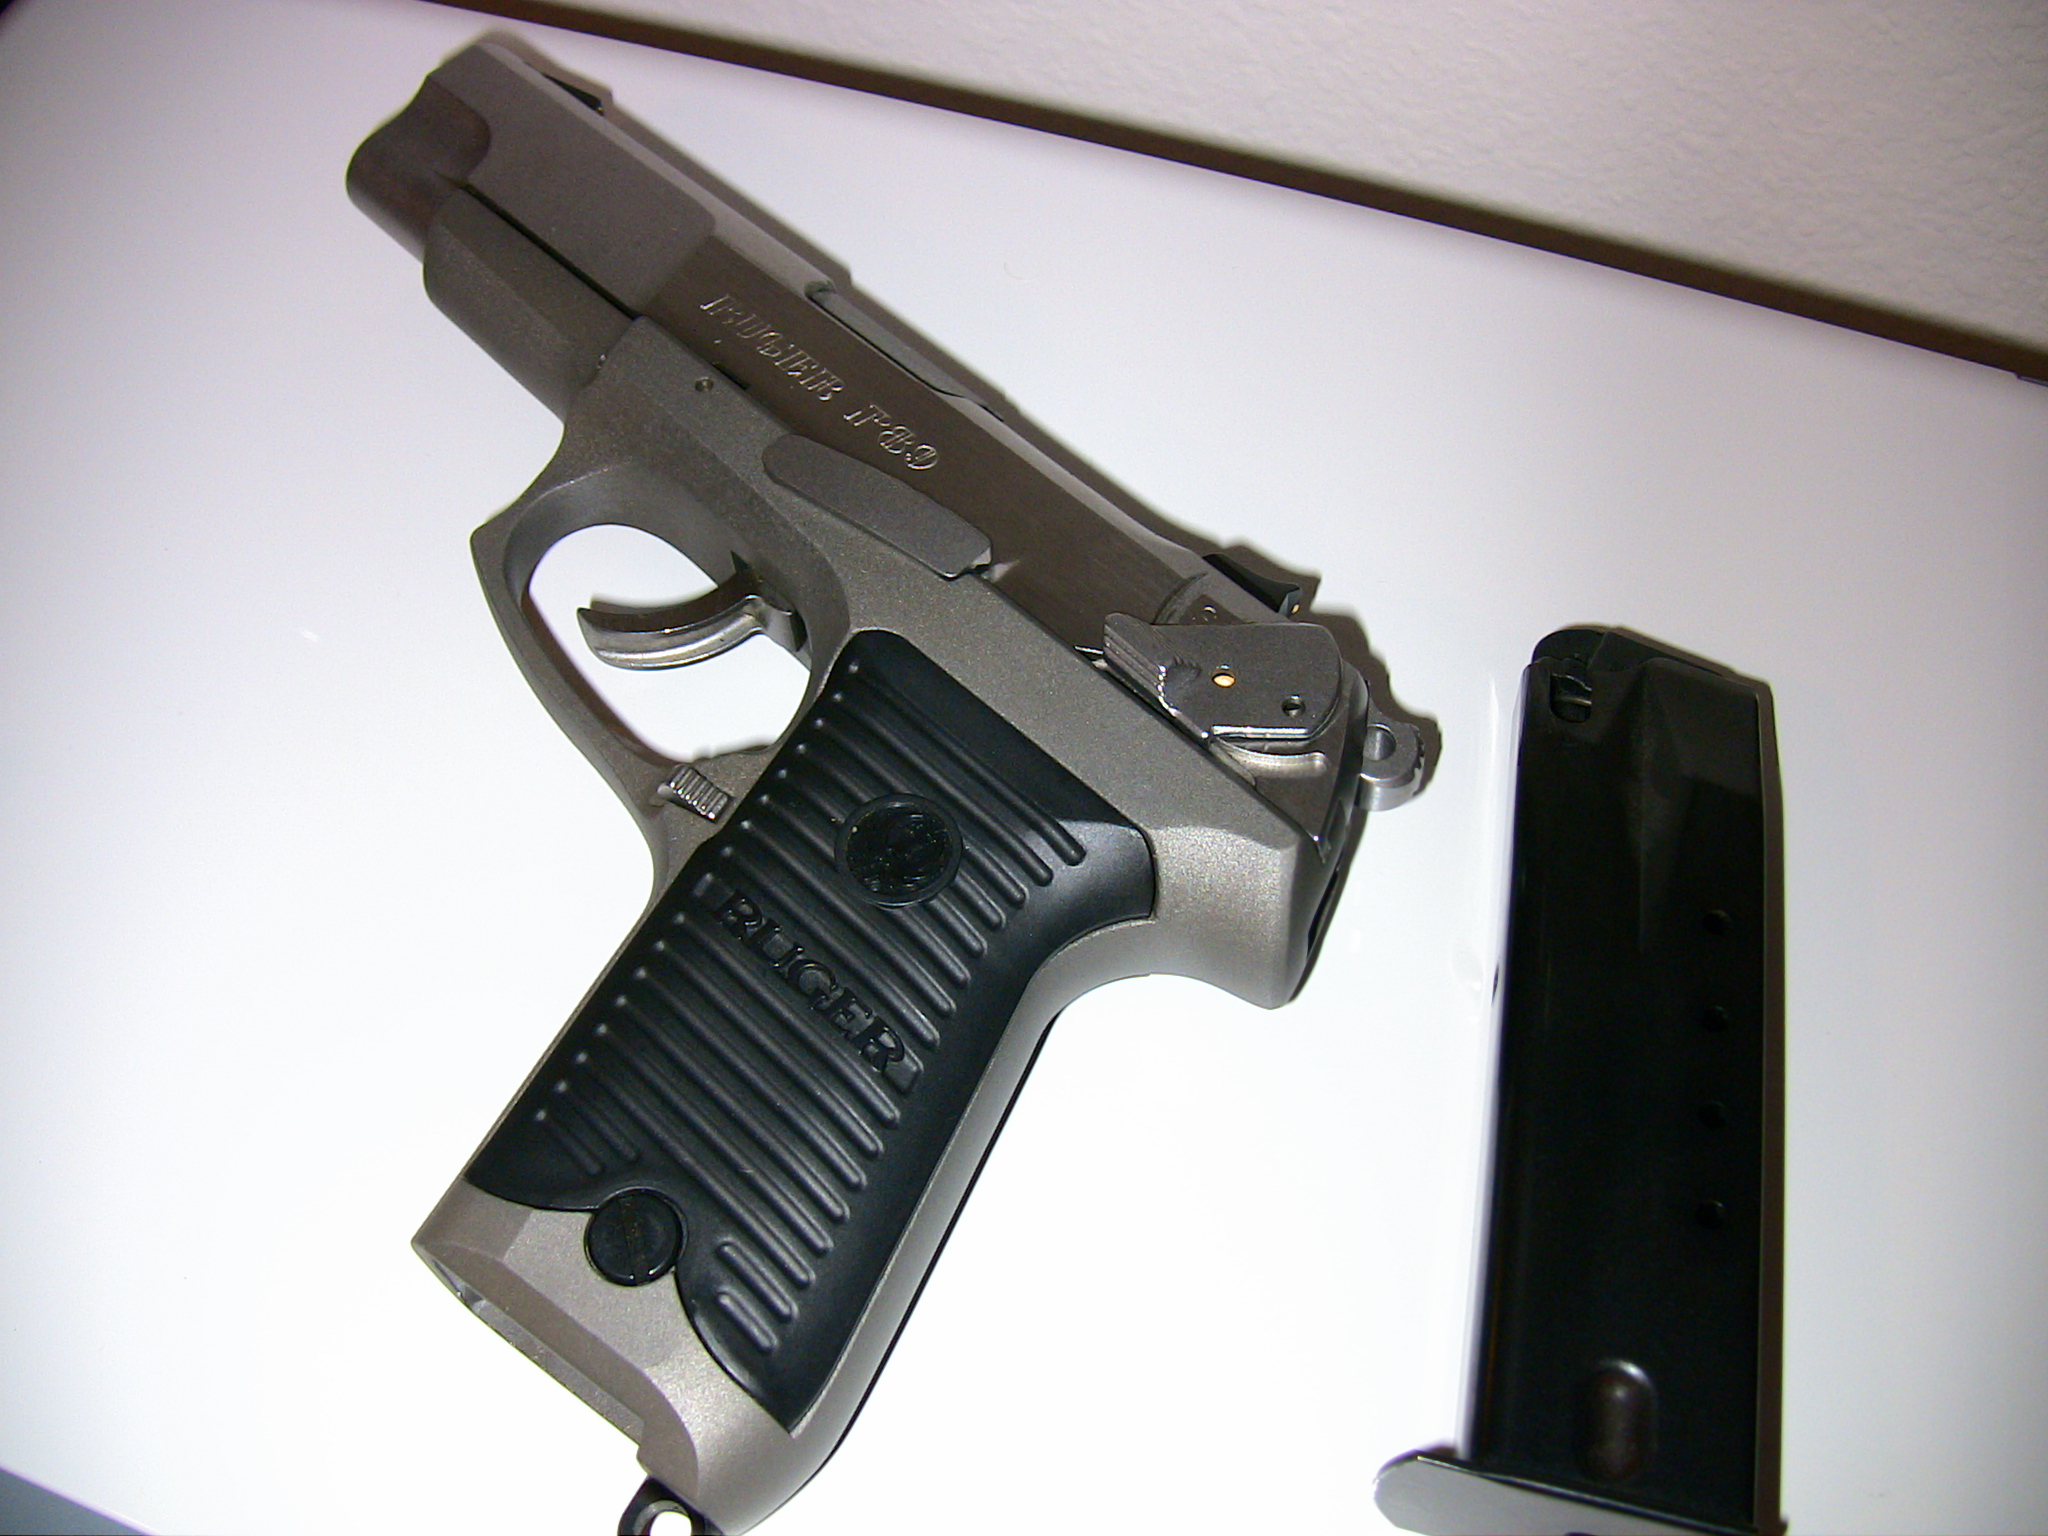 a gun lying on a white surface next to a device